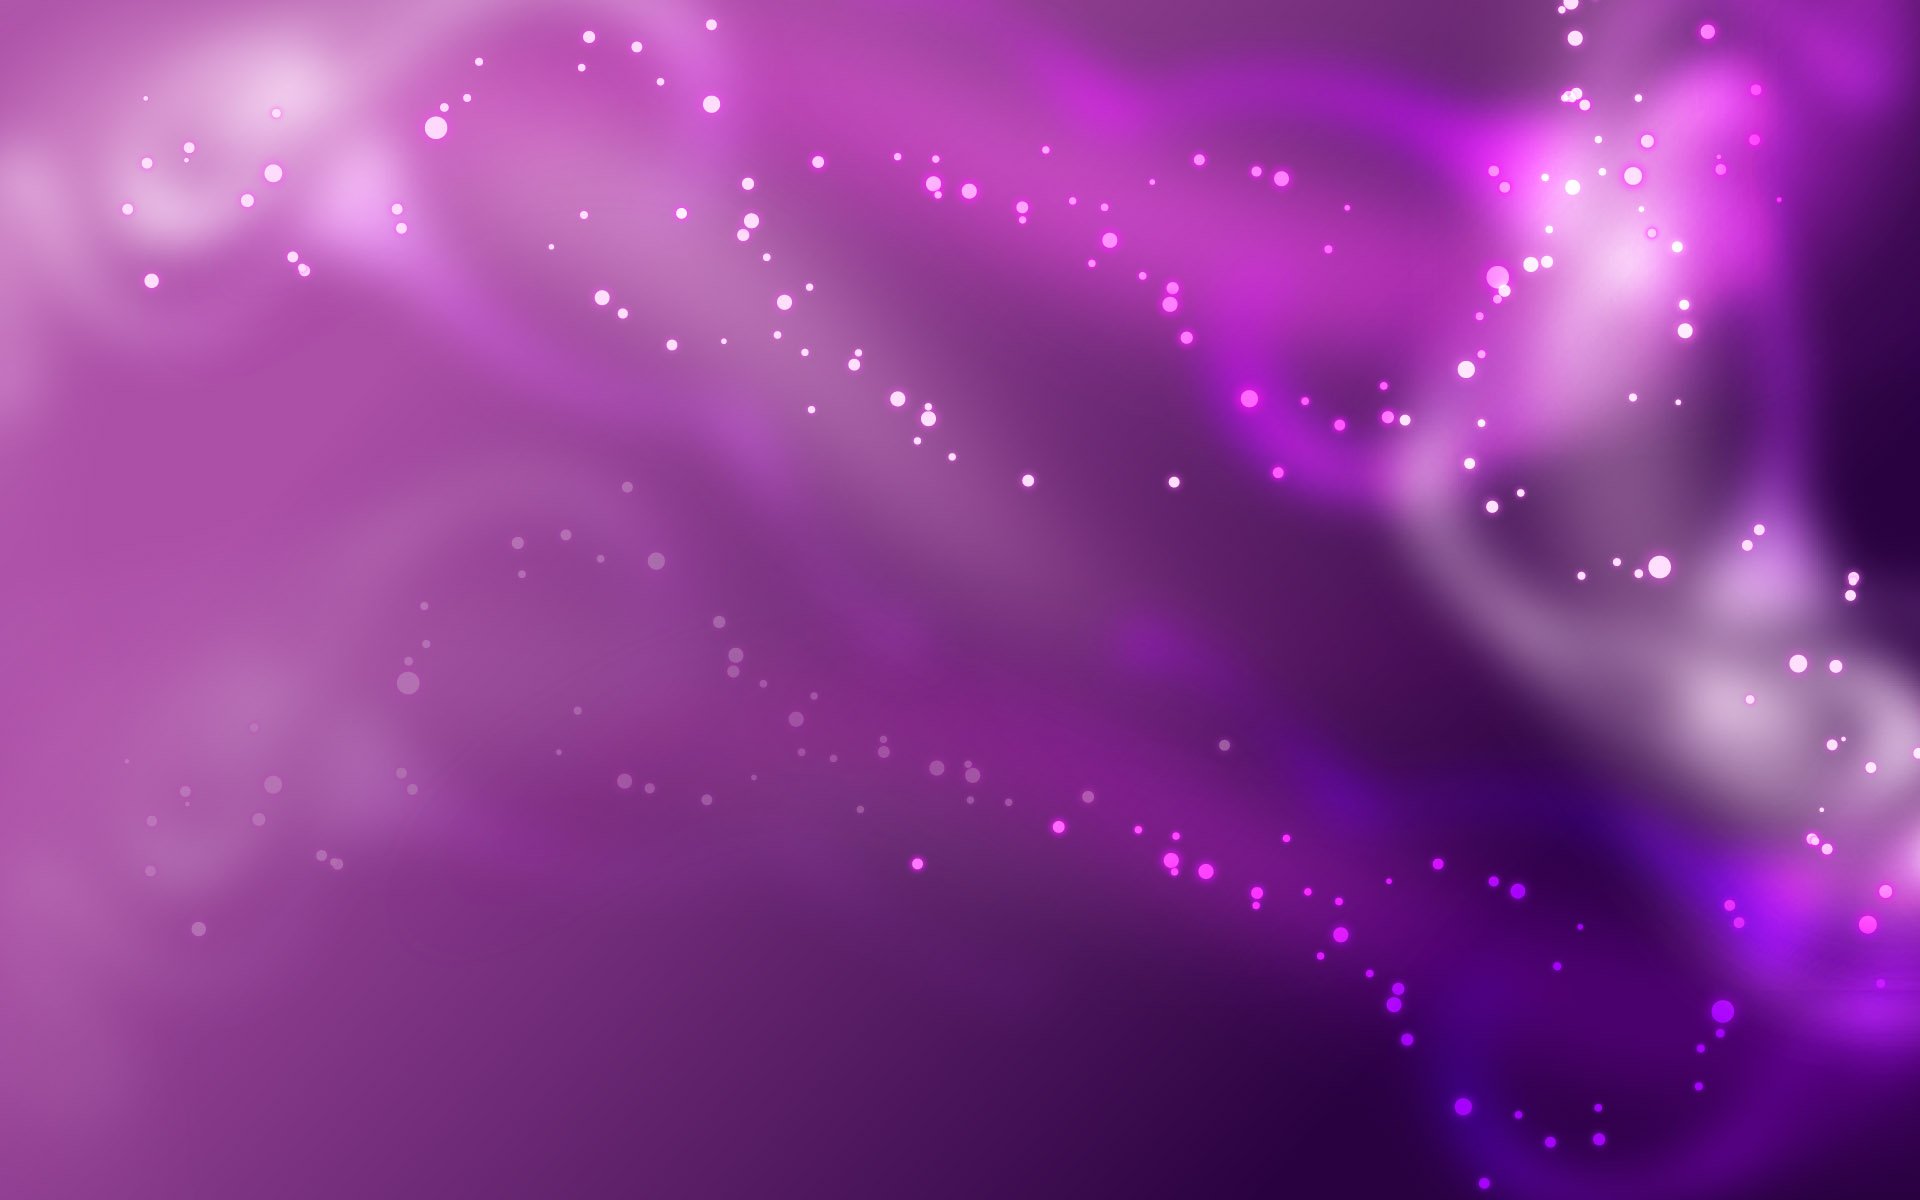 45 Stunning and Decent Purple Backgrounds takedesigns